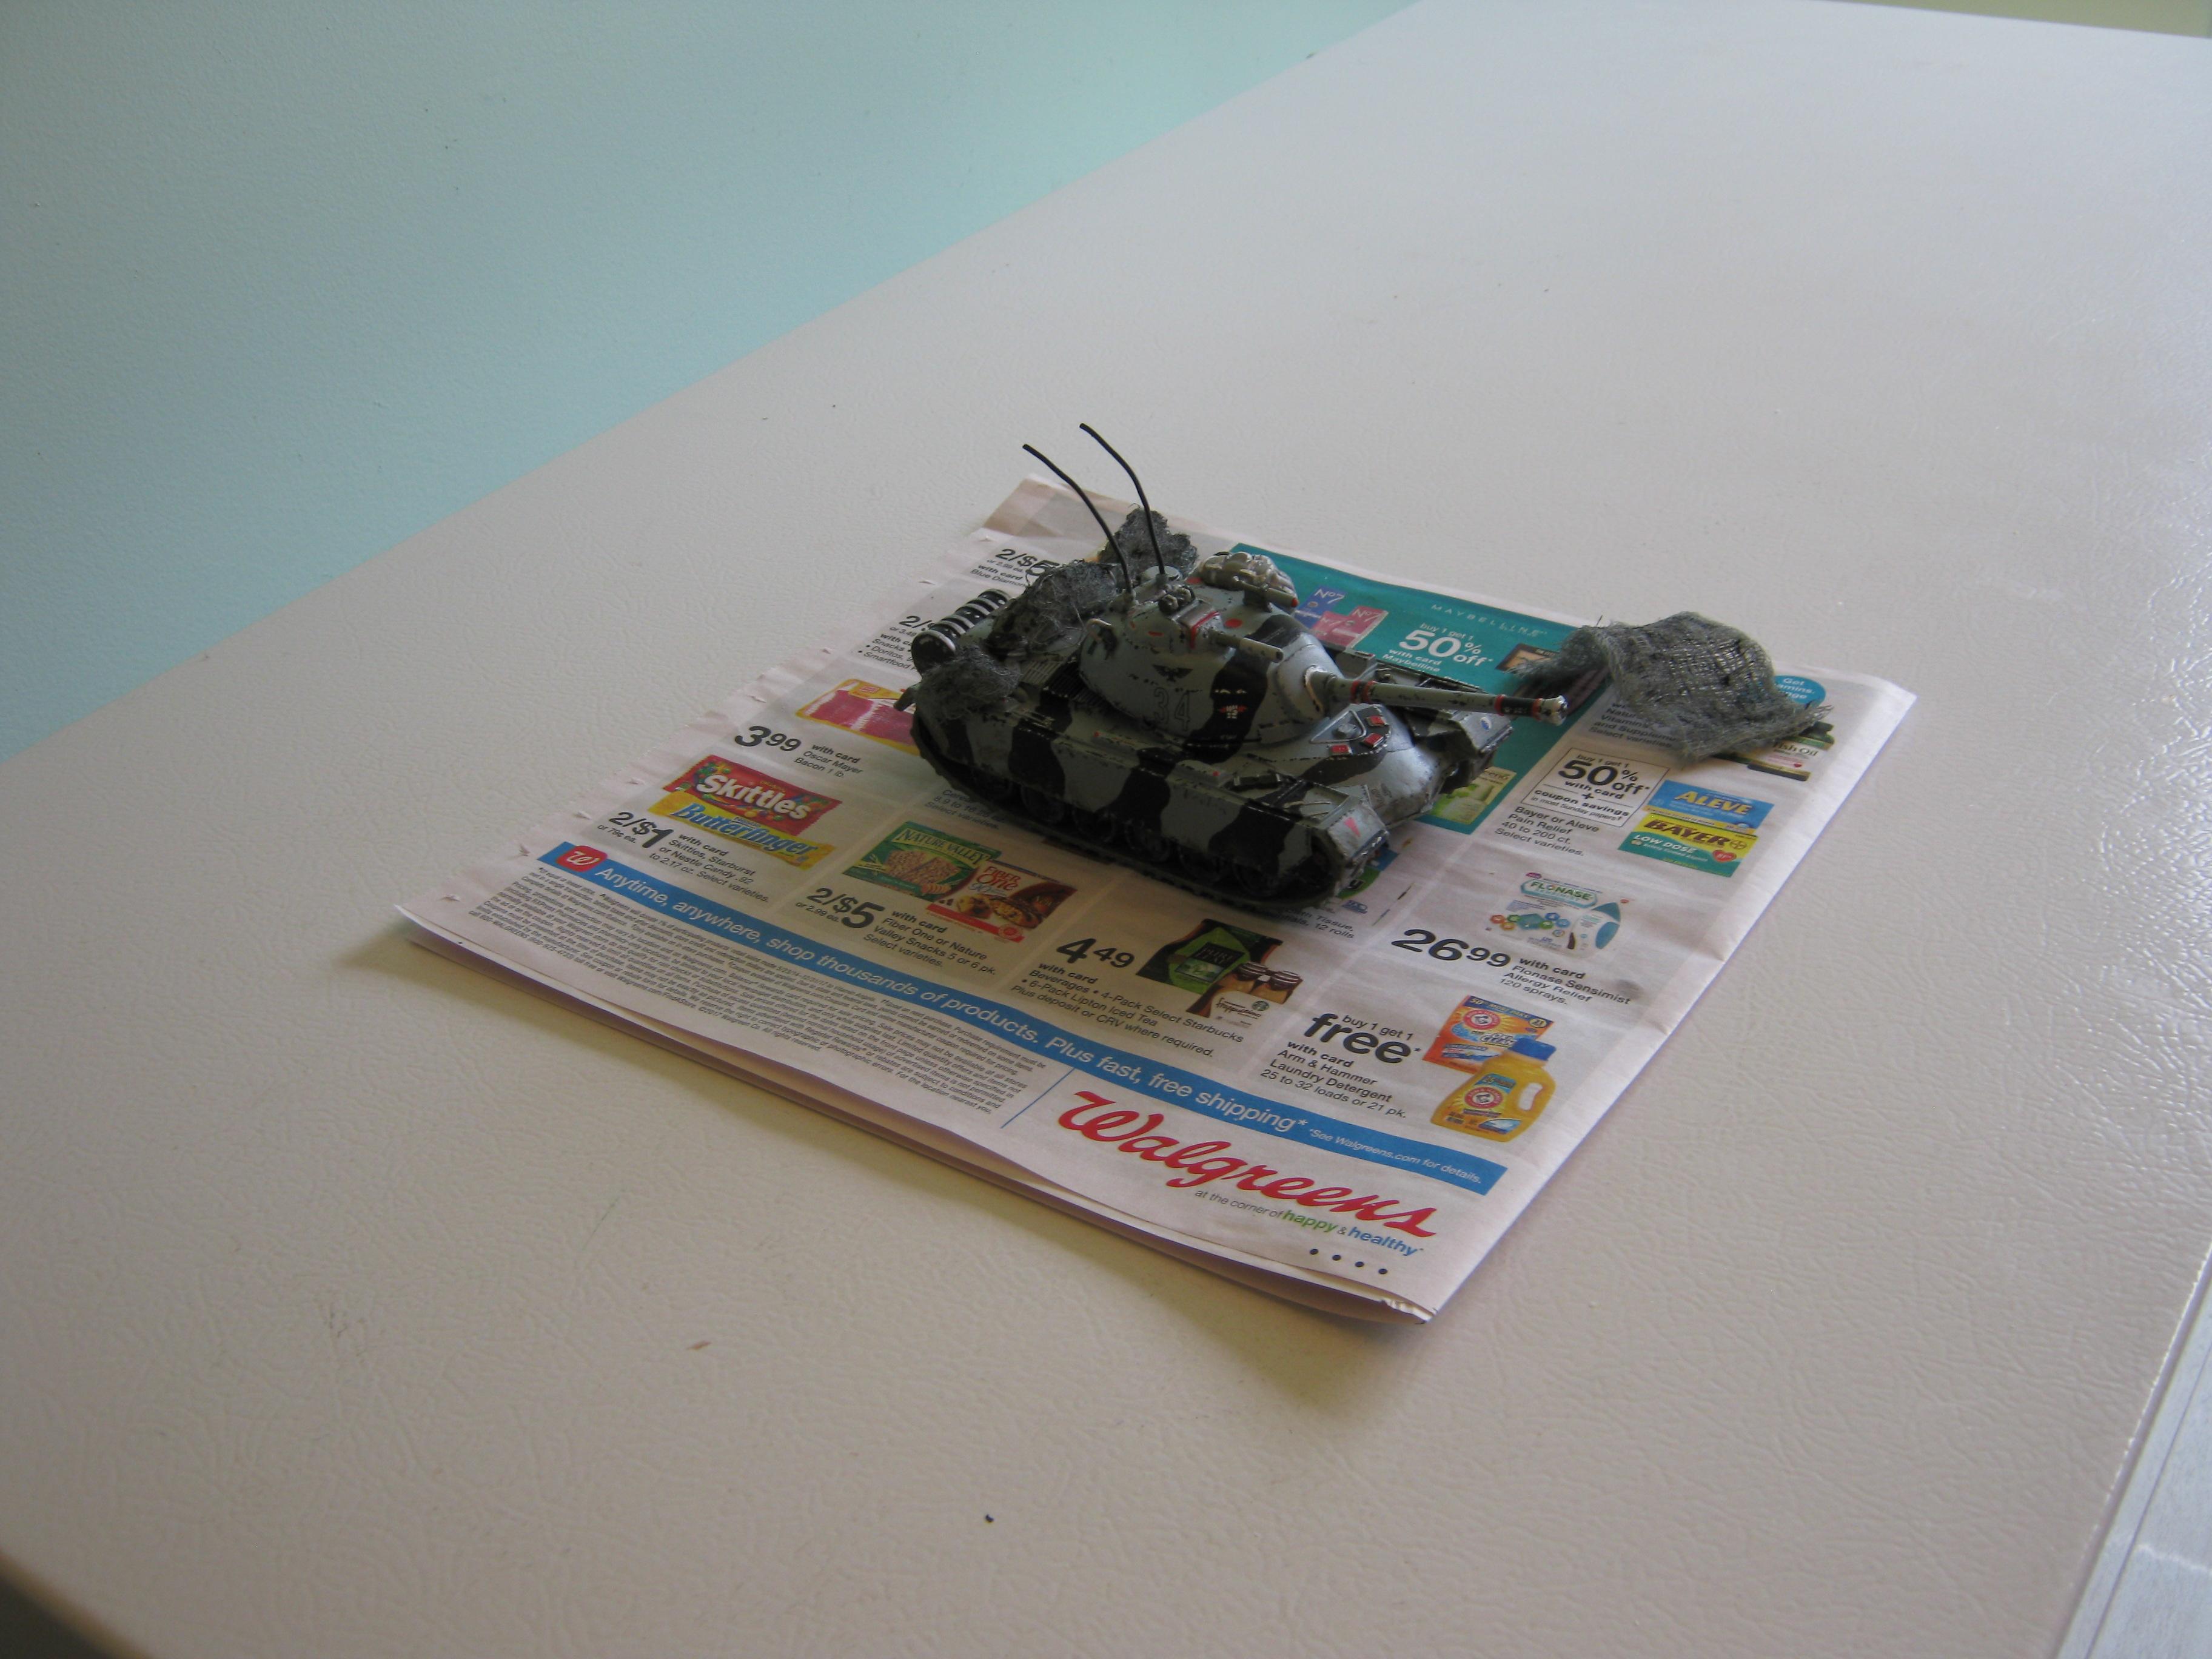 Conversion, Counts As, Imperial, Light Tank, M47, M48, Recon Vehicle, Scouts, Tank, Timmee Toys, Toy